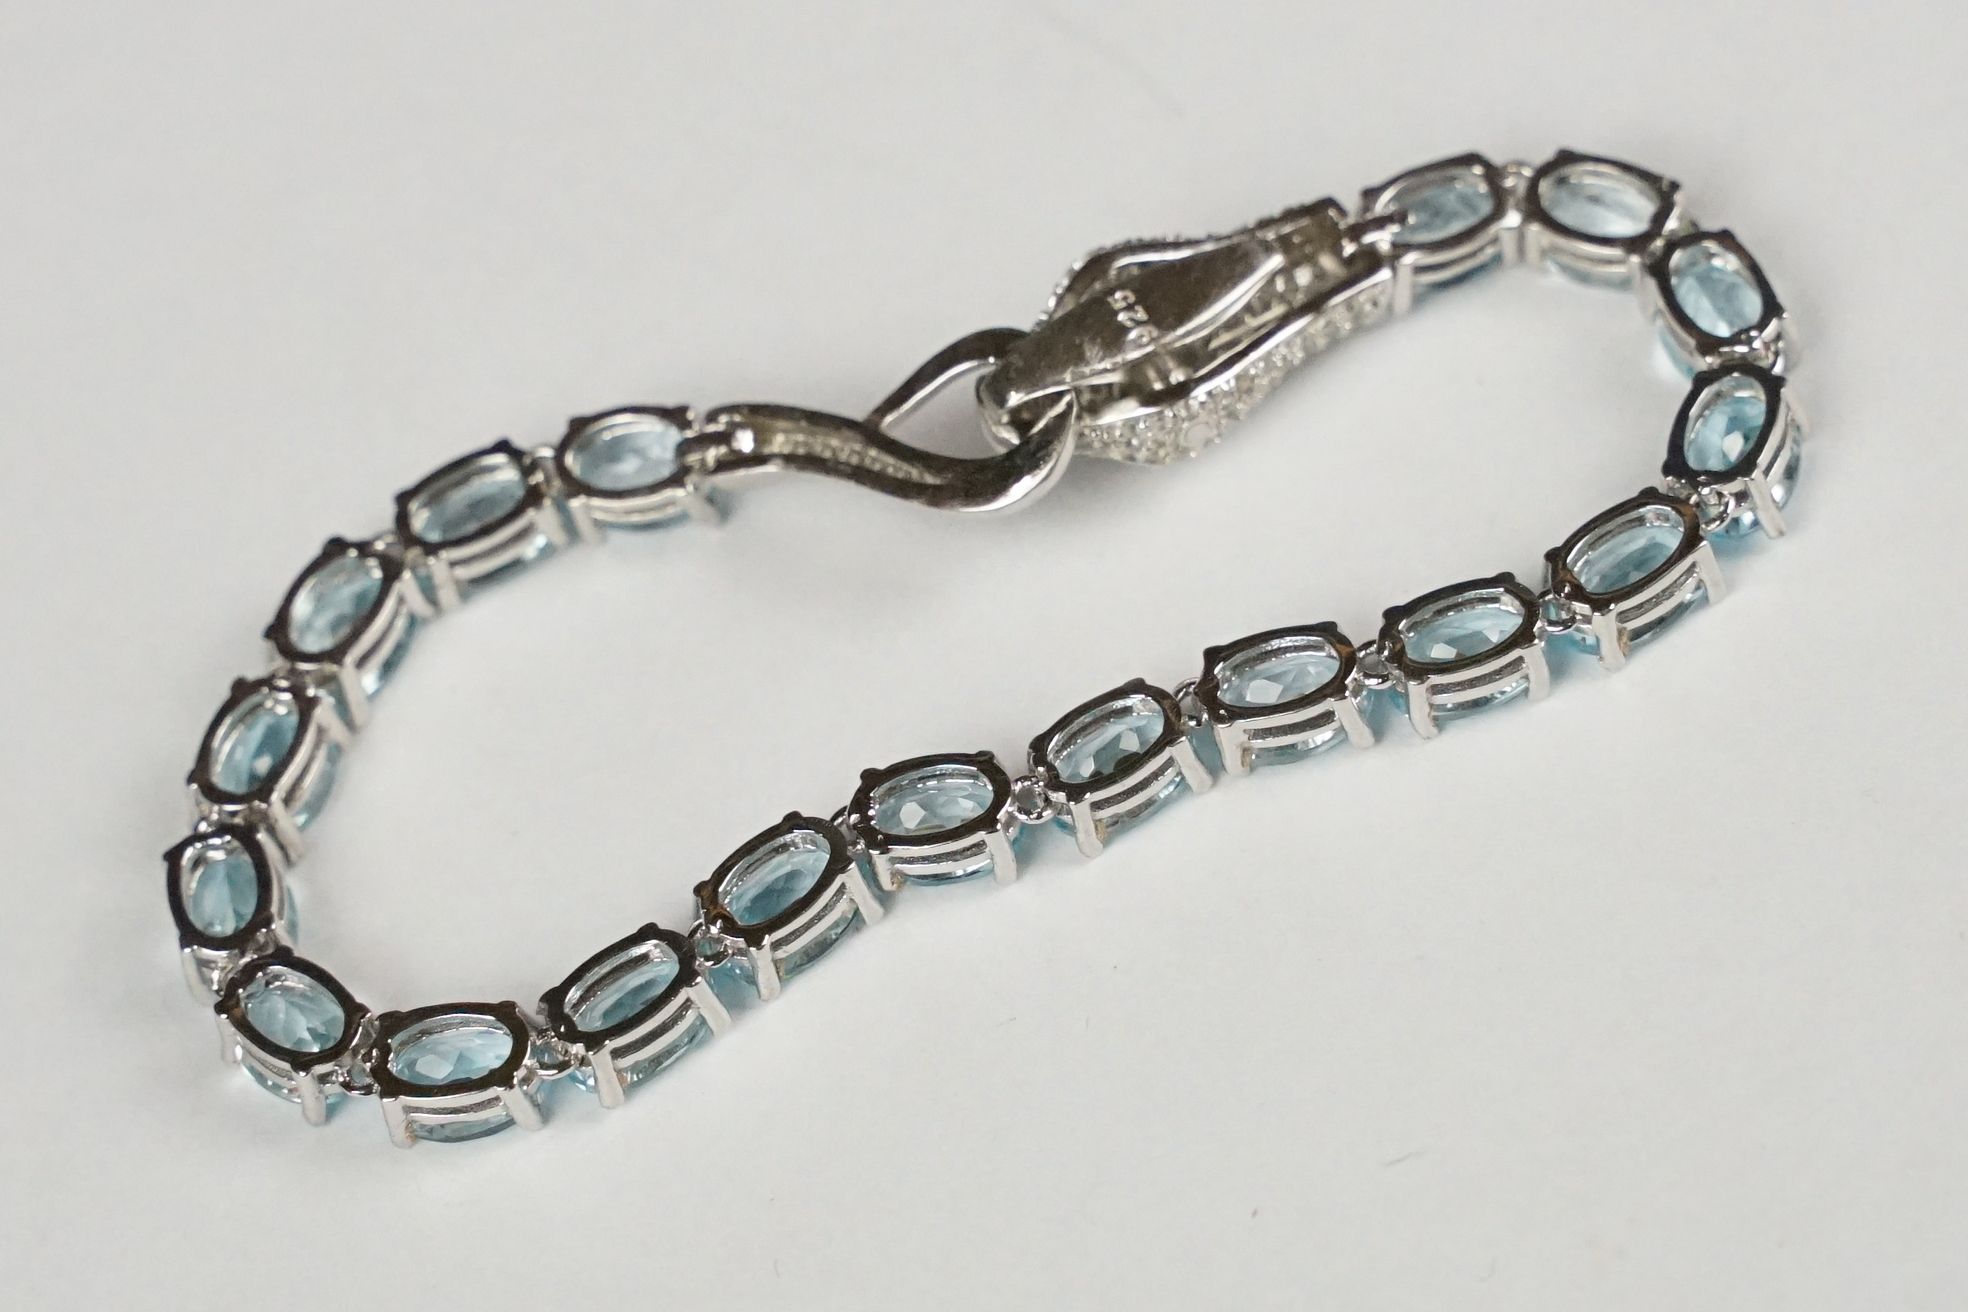 Silver and aquamarine bracelet with snake head clasp - Image 3 of 3